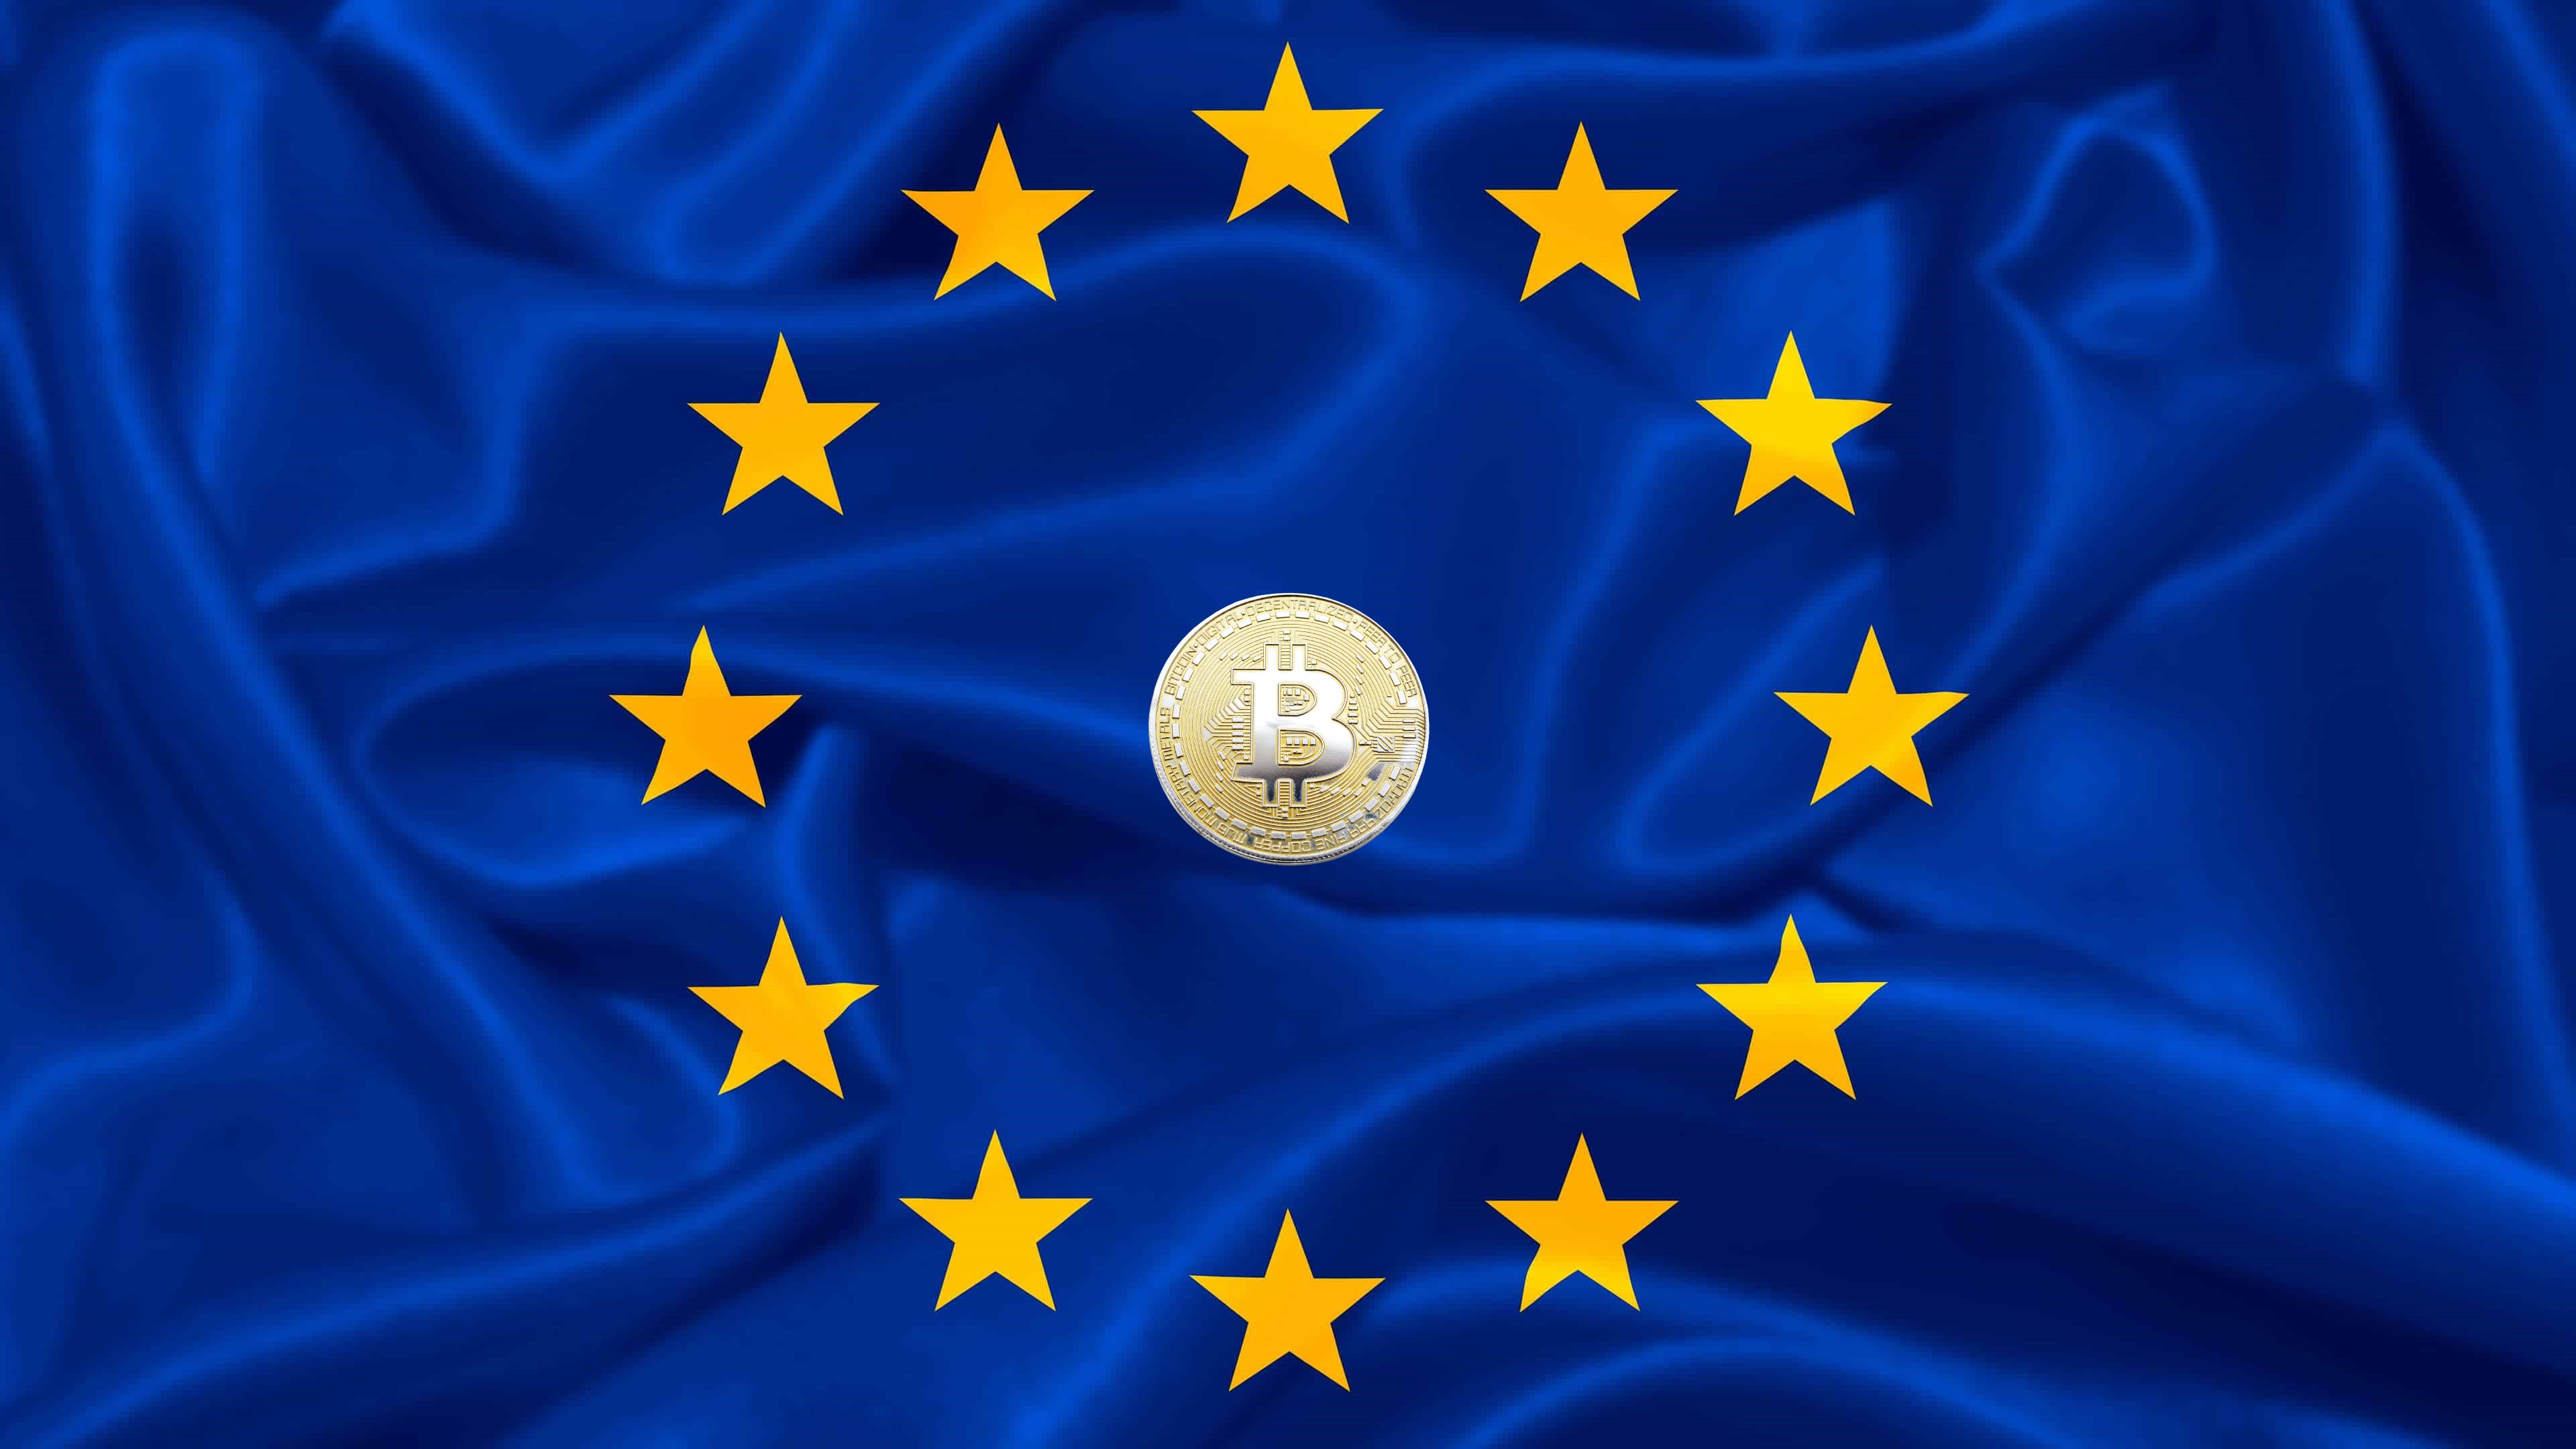 Europe Gears Up for Its First Bitcoin ETF by Jacobi 